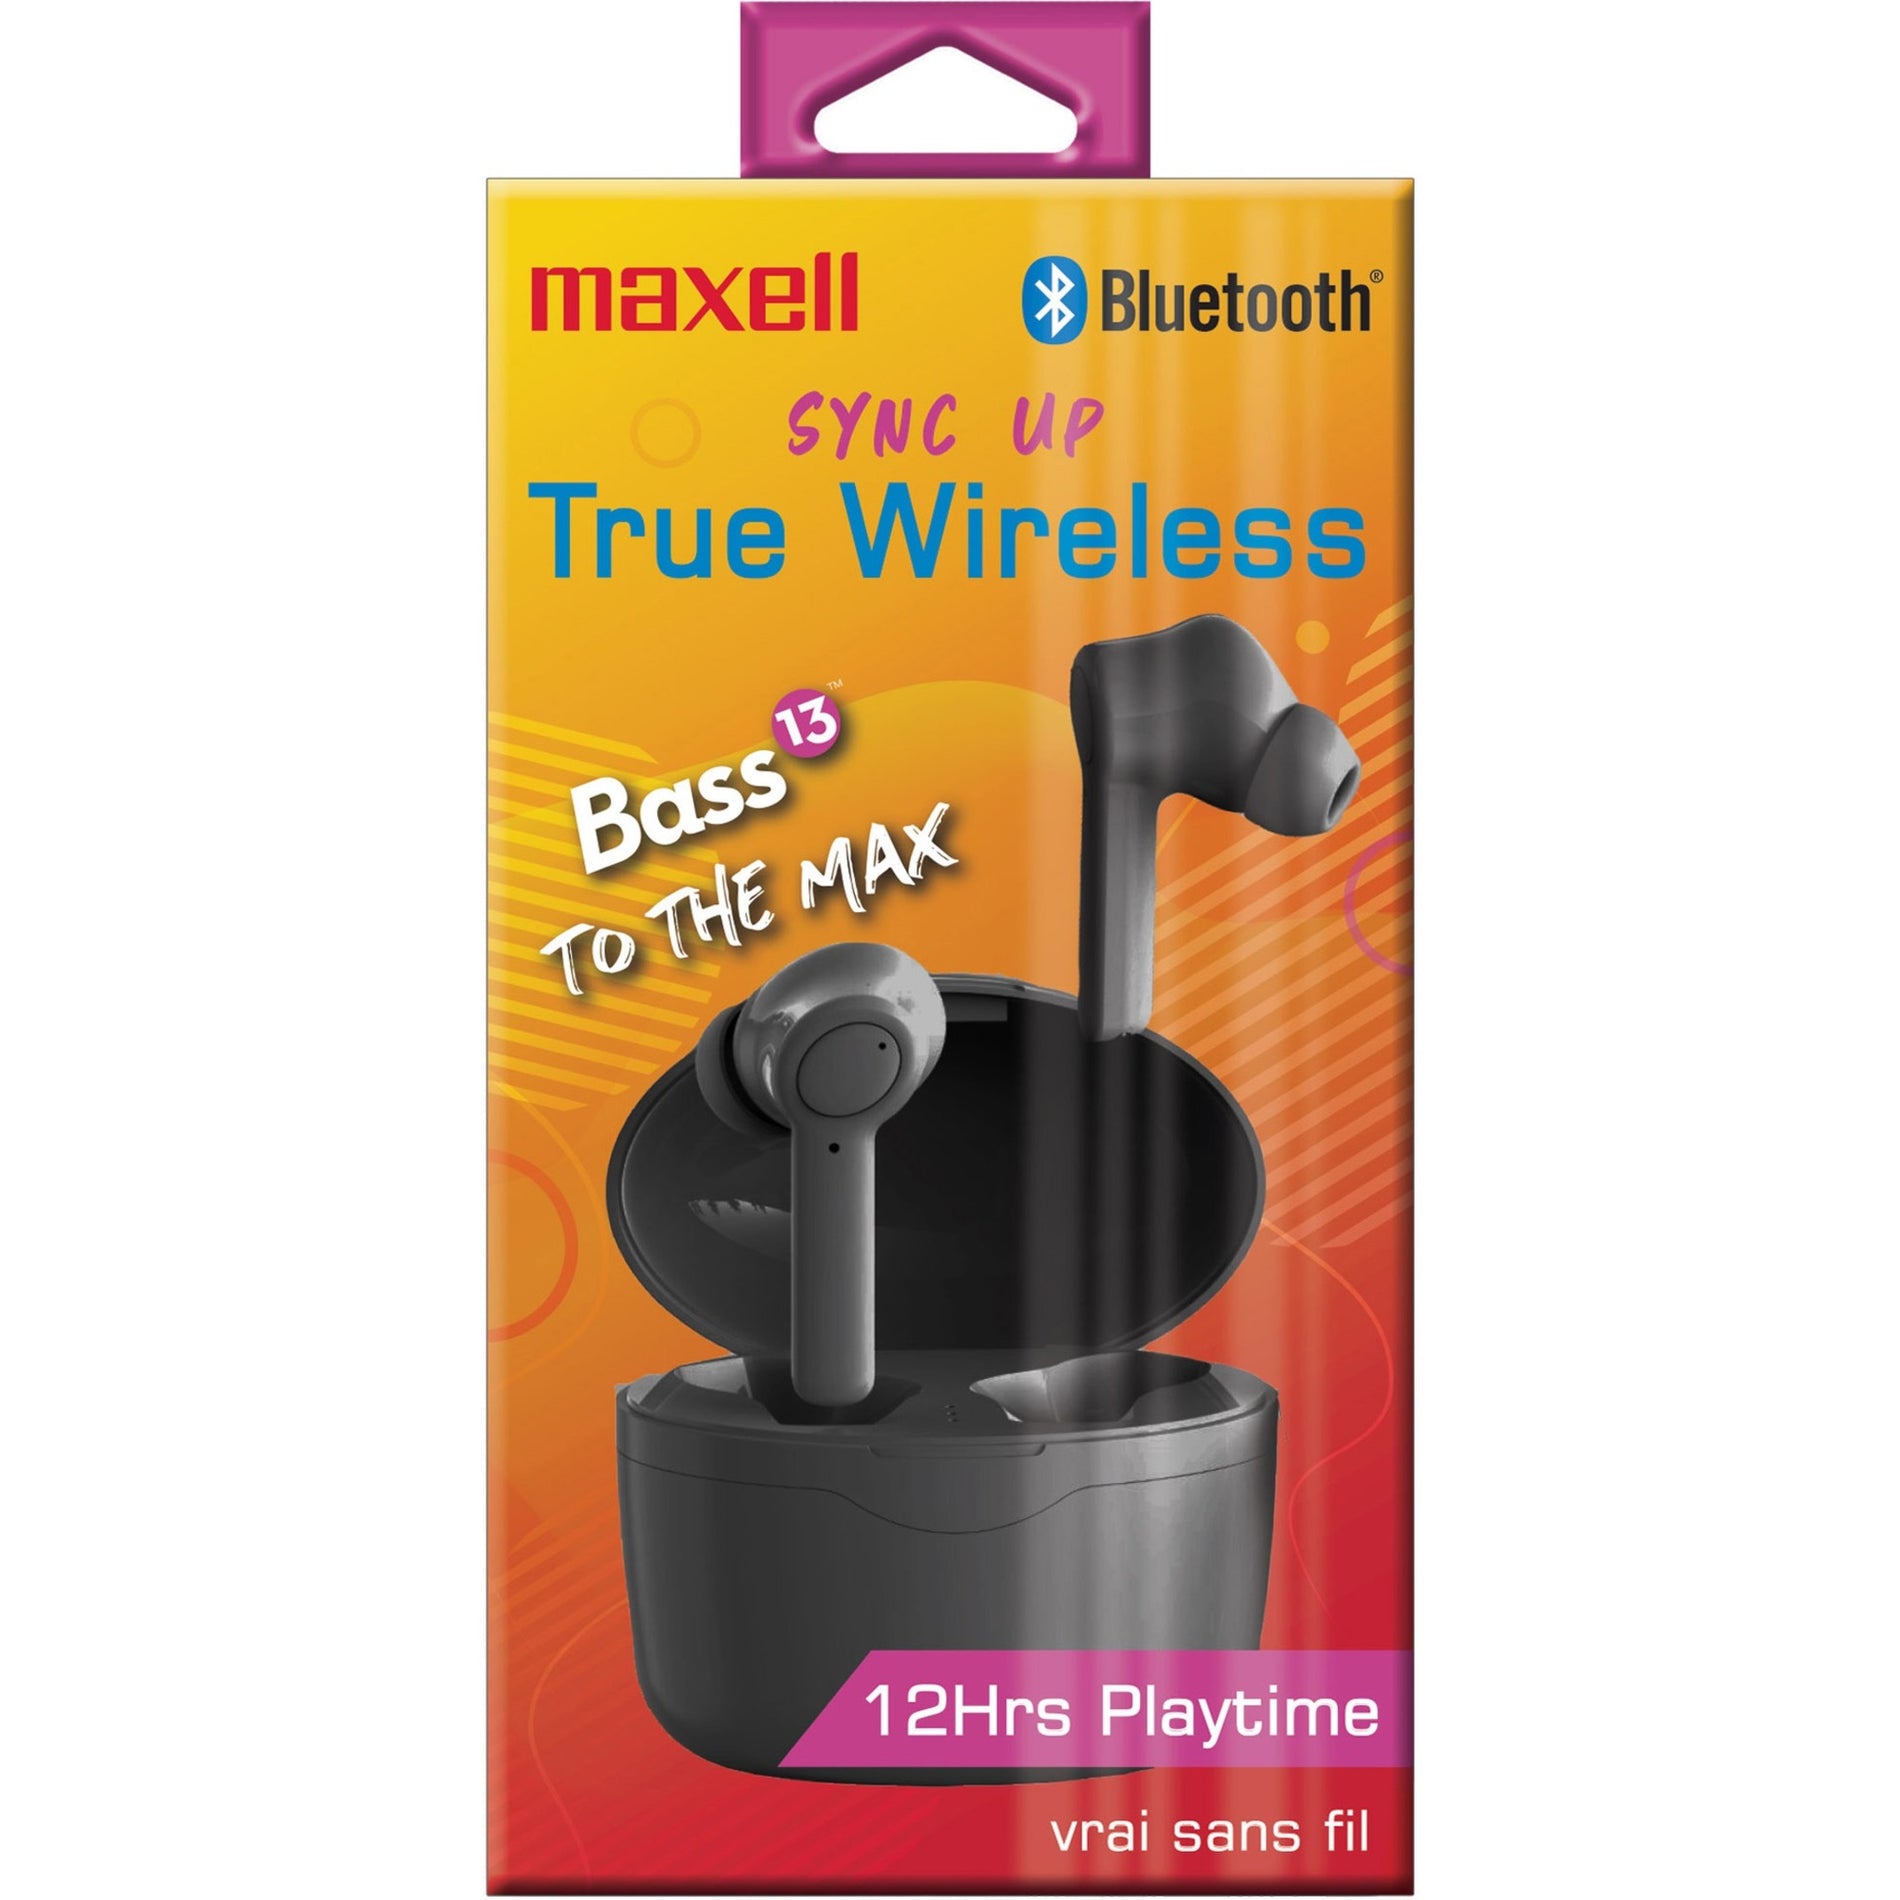 Maxell 199899 Sync Up True Wireless Bluetooth Earbuds Secure Fit Charging Case Black